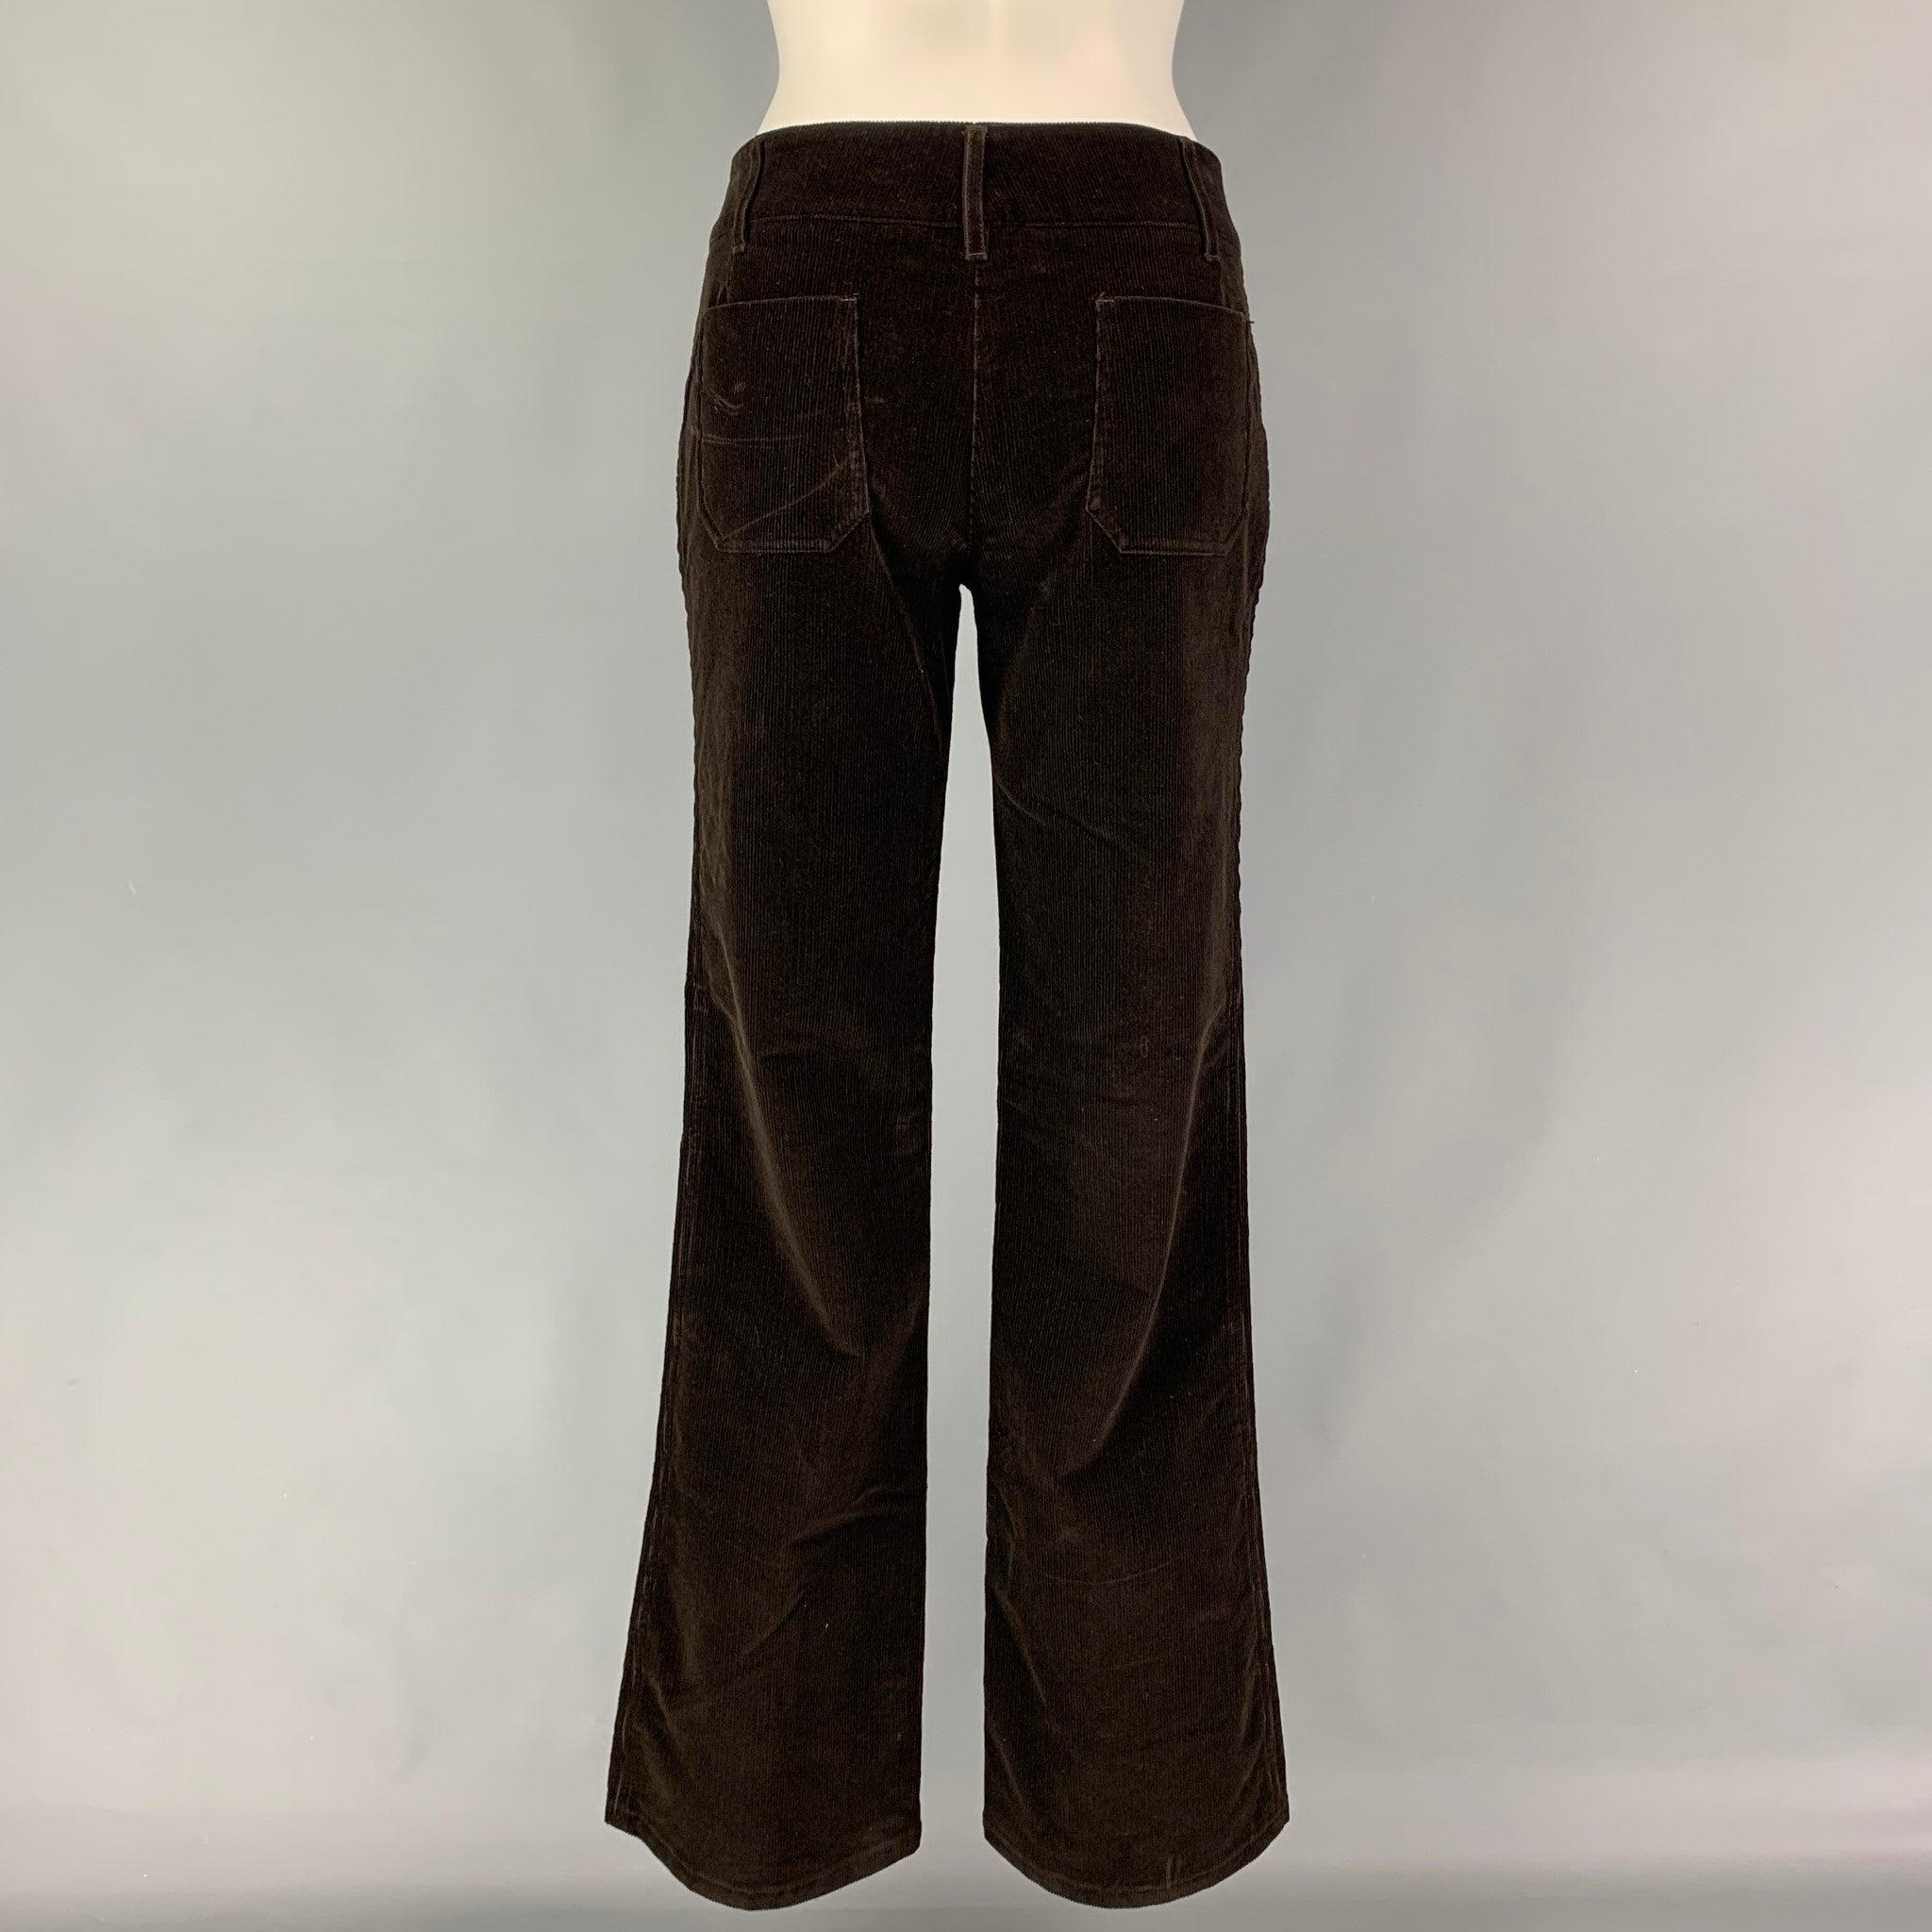 PRADA casual pants comes in a brown corduroy featuring a flat front and a button fly closure. Made in Italy.
 Very Good
 Pre-Owned Condition. 
 

 Marked:  42 
 

 Measurements: 
  Waist: 32 inches Rise: 9 inches Inseam: 34 inches 
  
  
  
 Sui